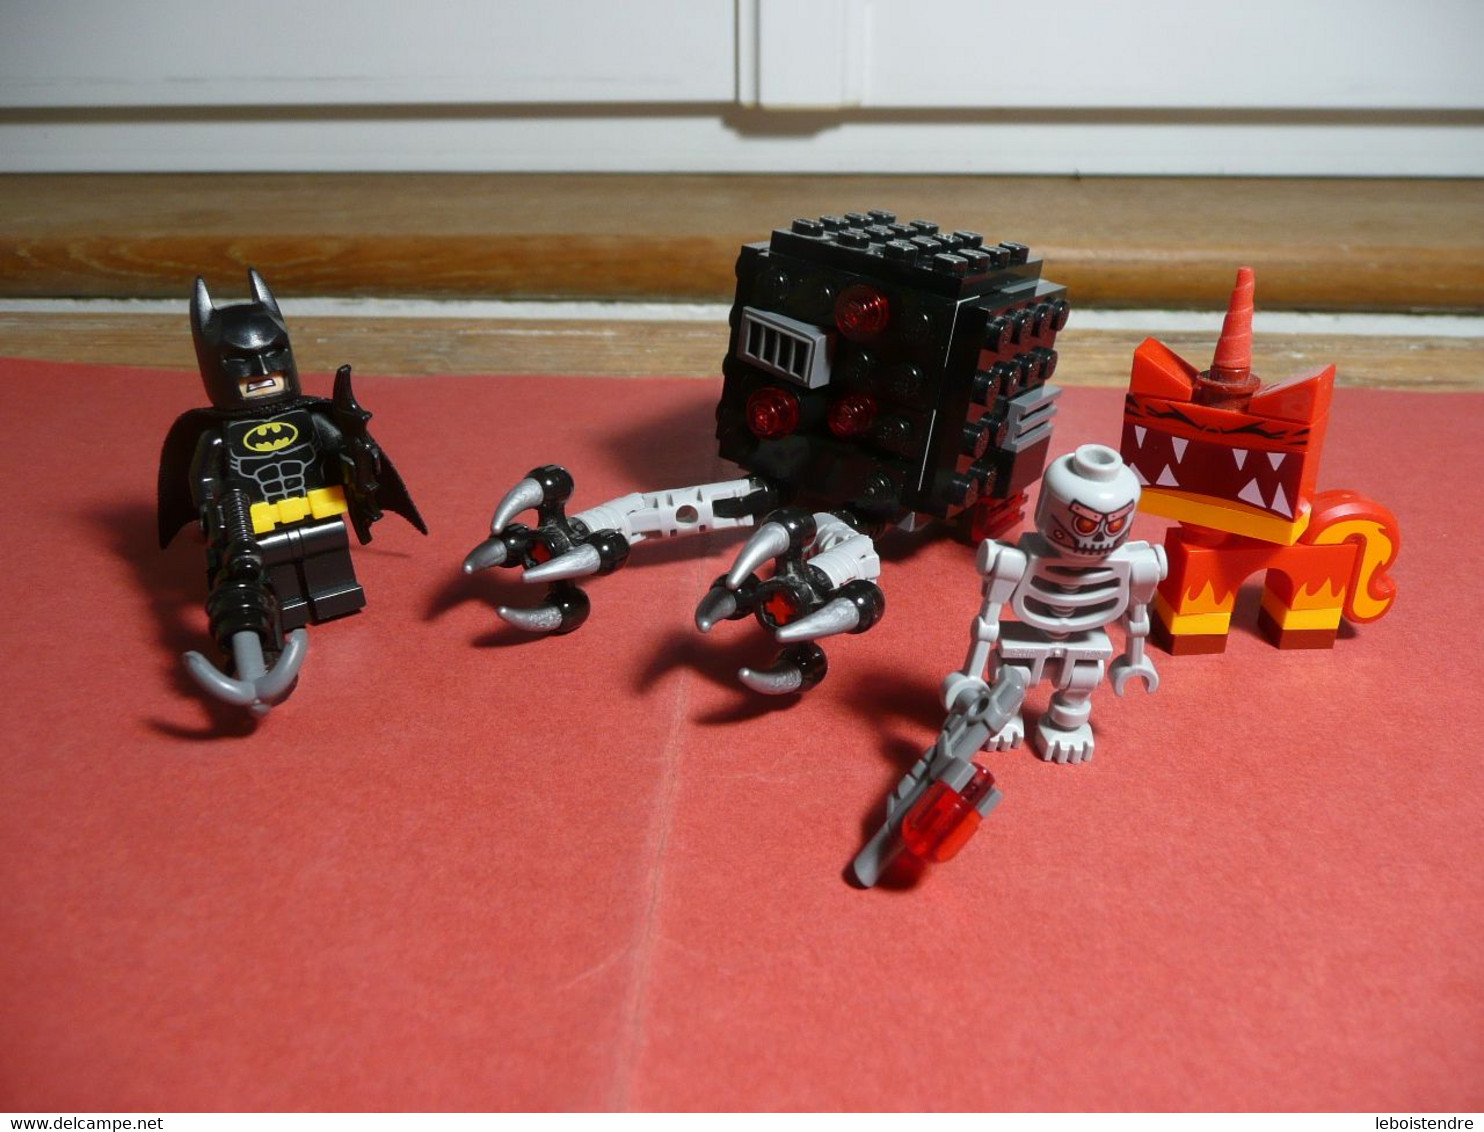 LEGO 70817 THE LEGO MOVIE 2 BATMAN AND SUPER ANGRY KITTY ATTACK  COMPLET DES PIECES SANS NOTICE SANS BOITE SKELETON - Non Classificati